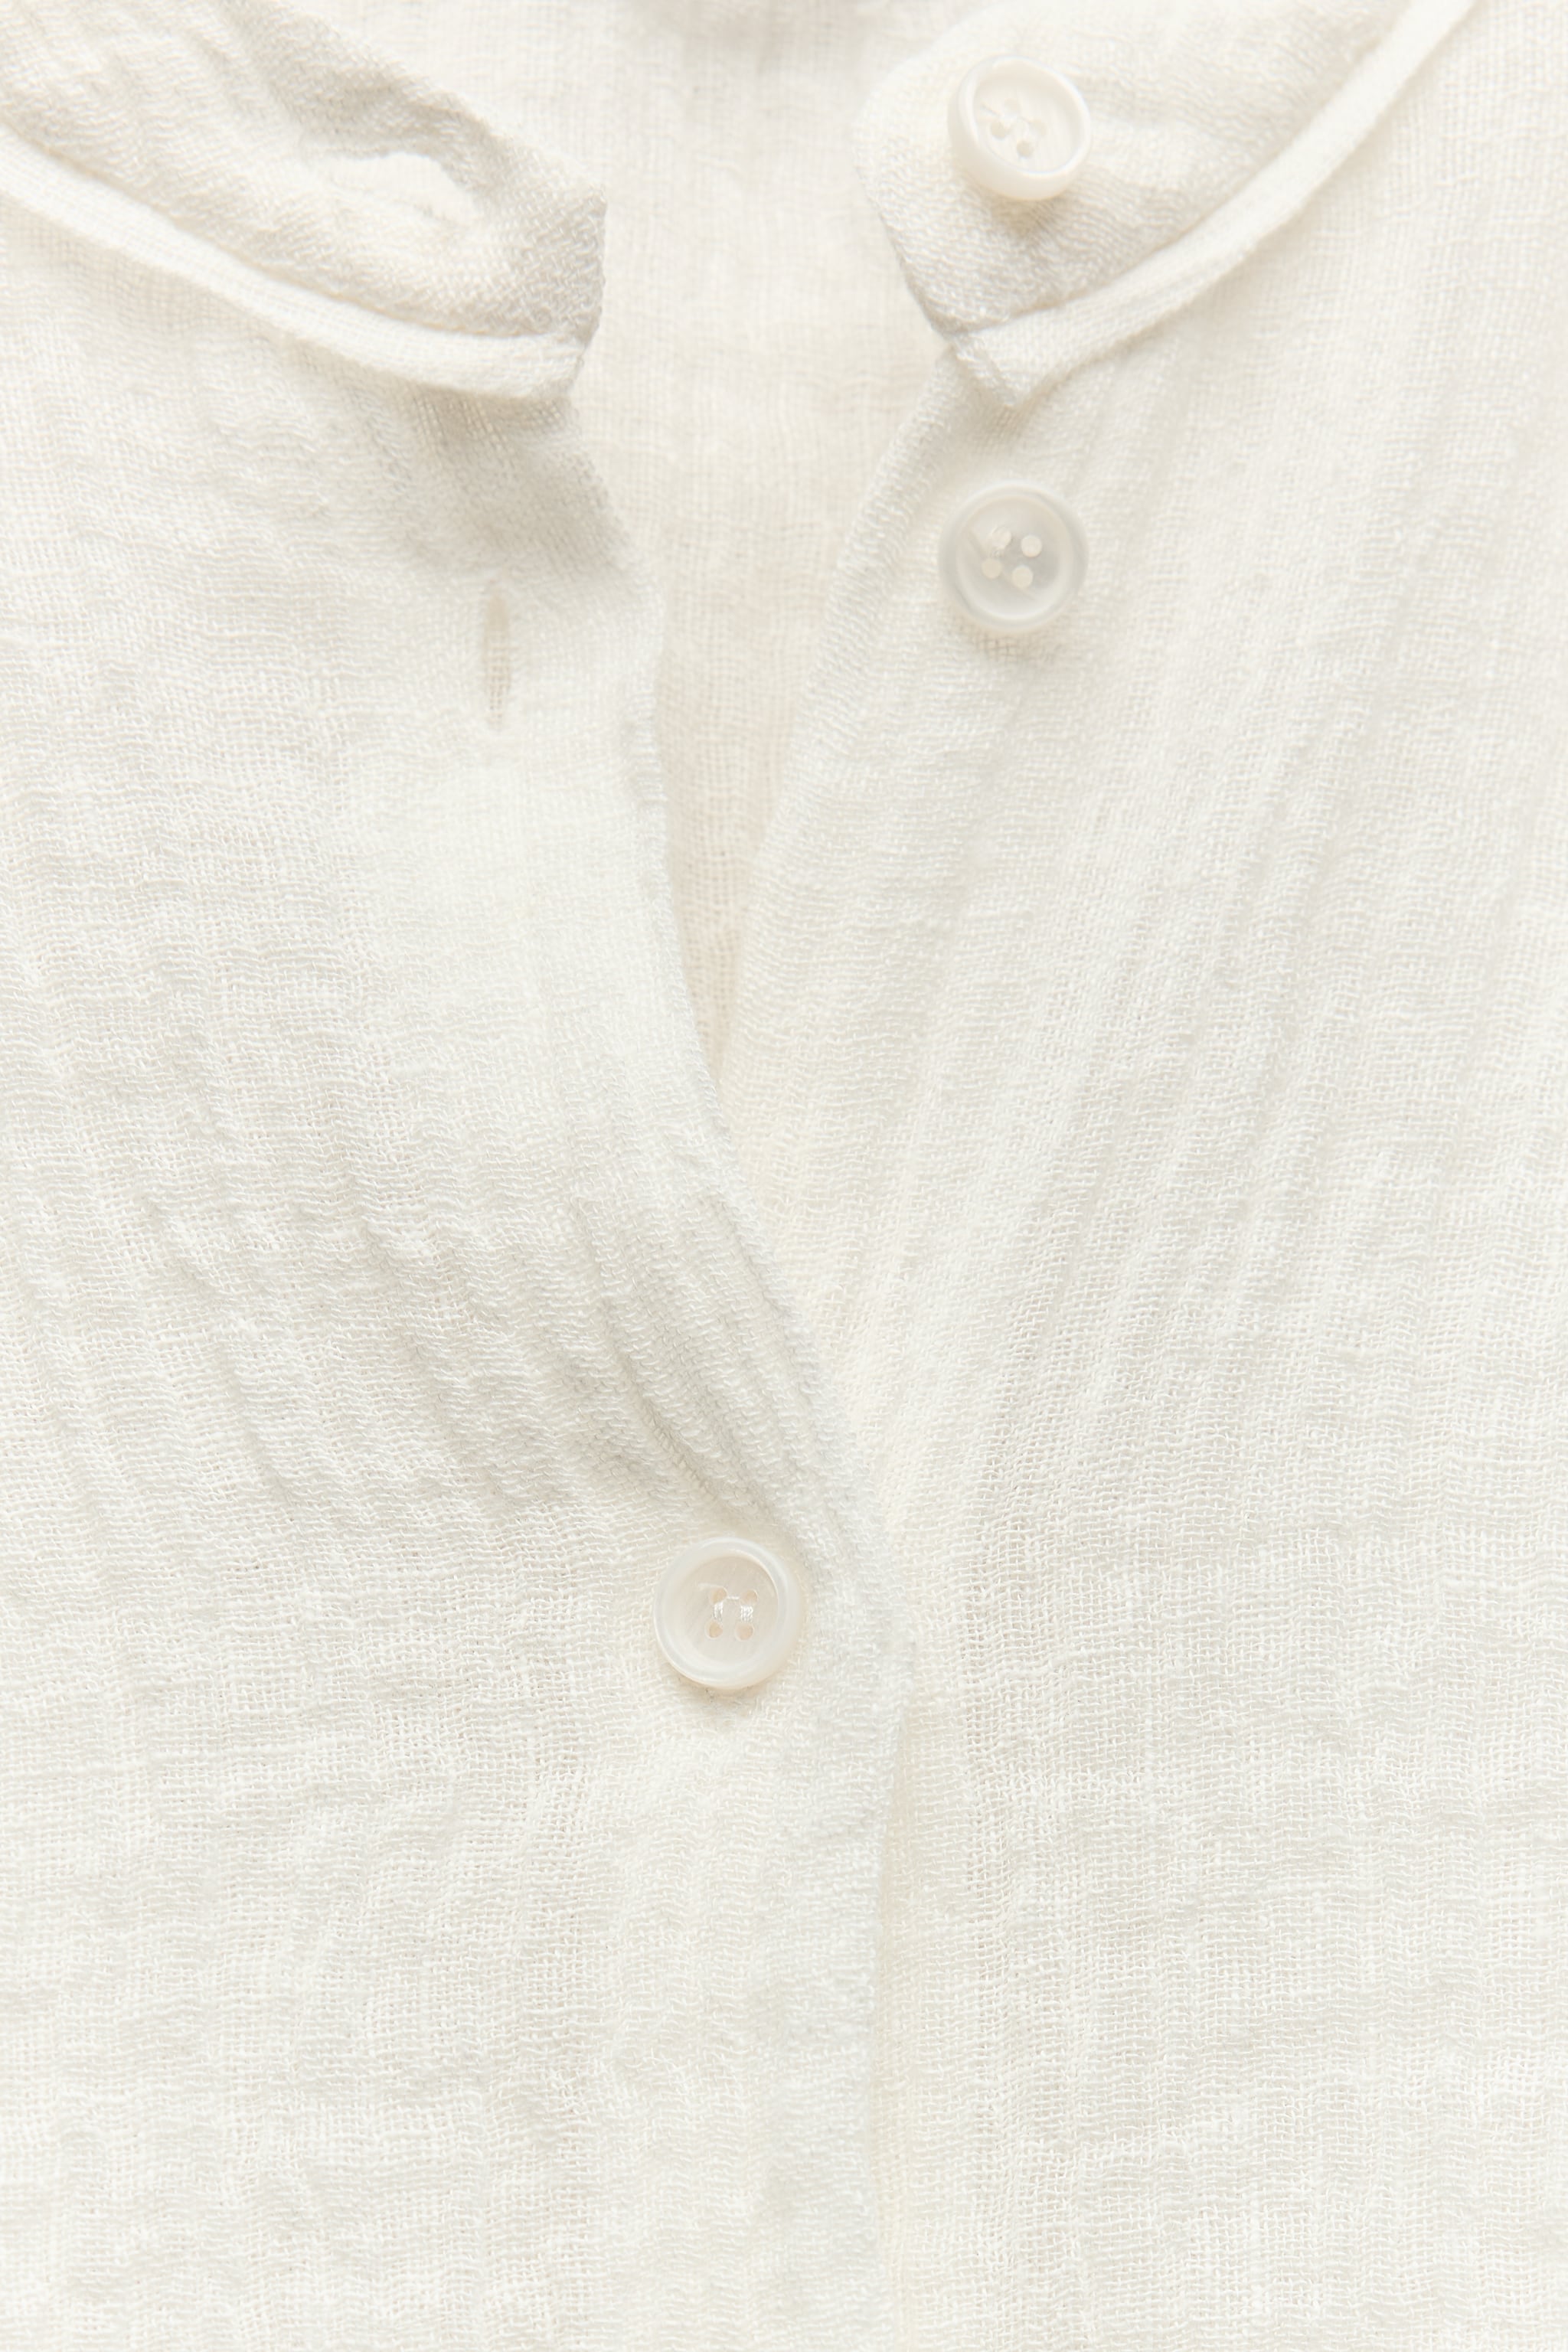 ZW COLLECTION TEXTURED 100% LINEN BLOUSE